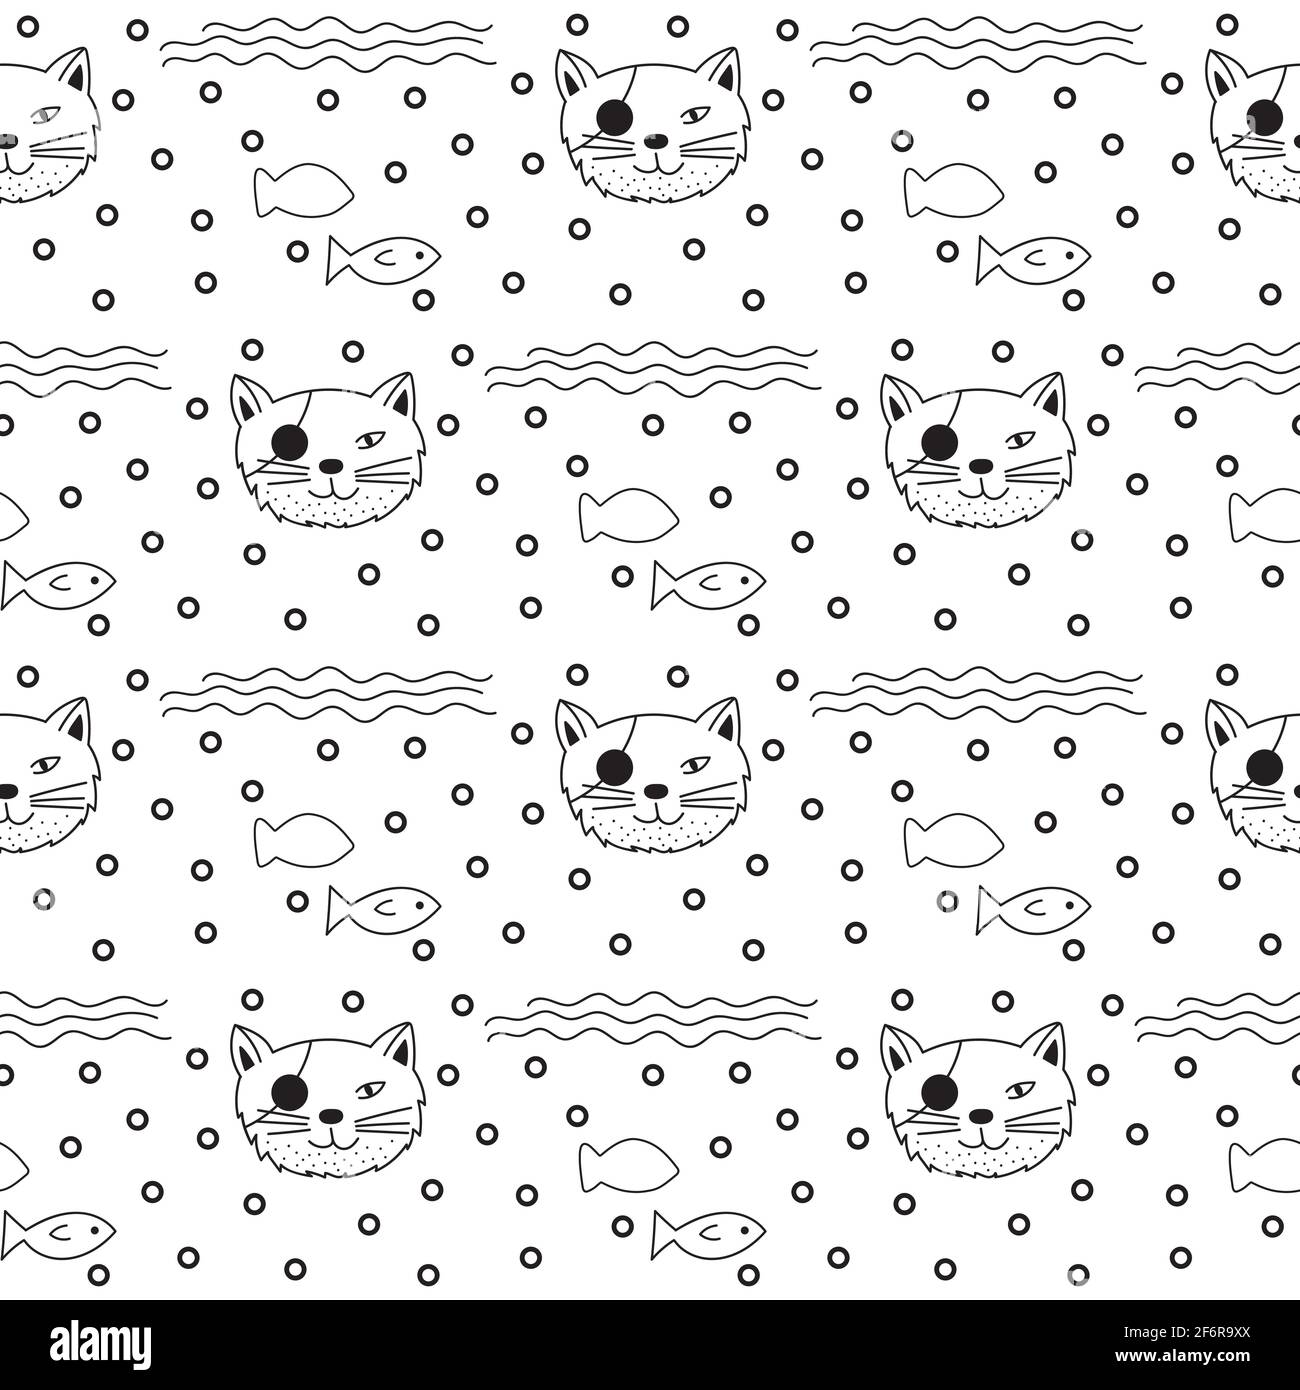 seamless cute pirate cat pattern vector illustration. Stock Vector